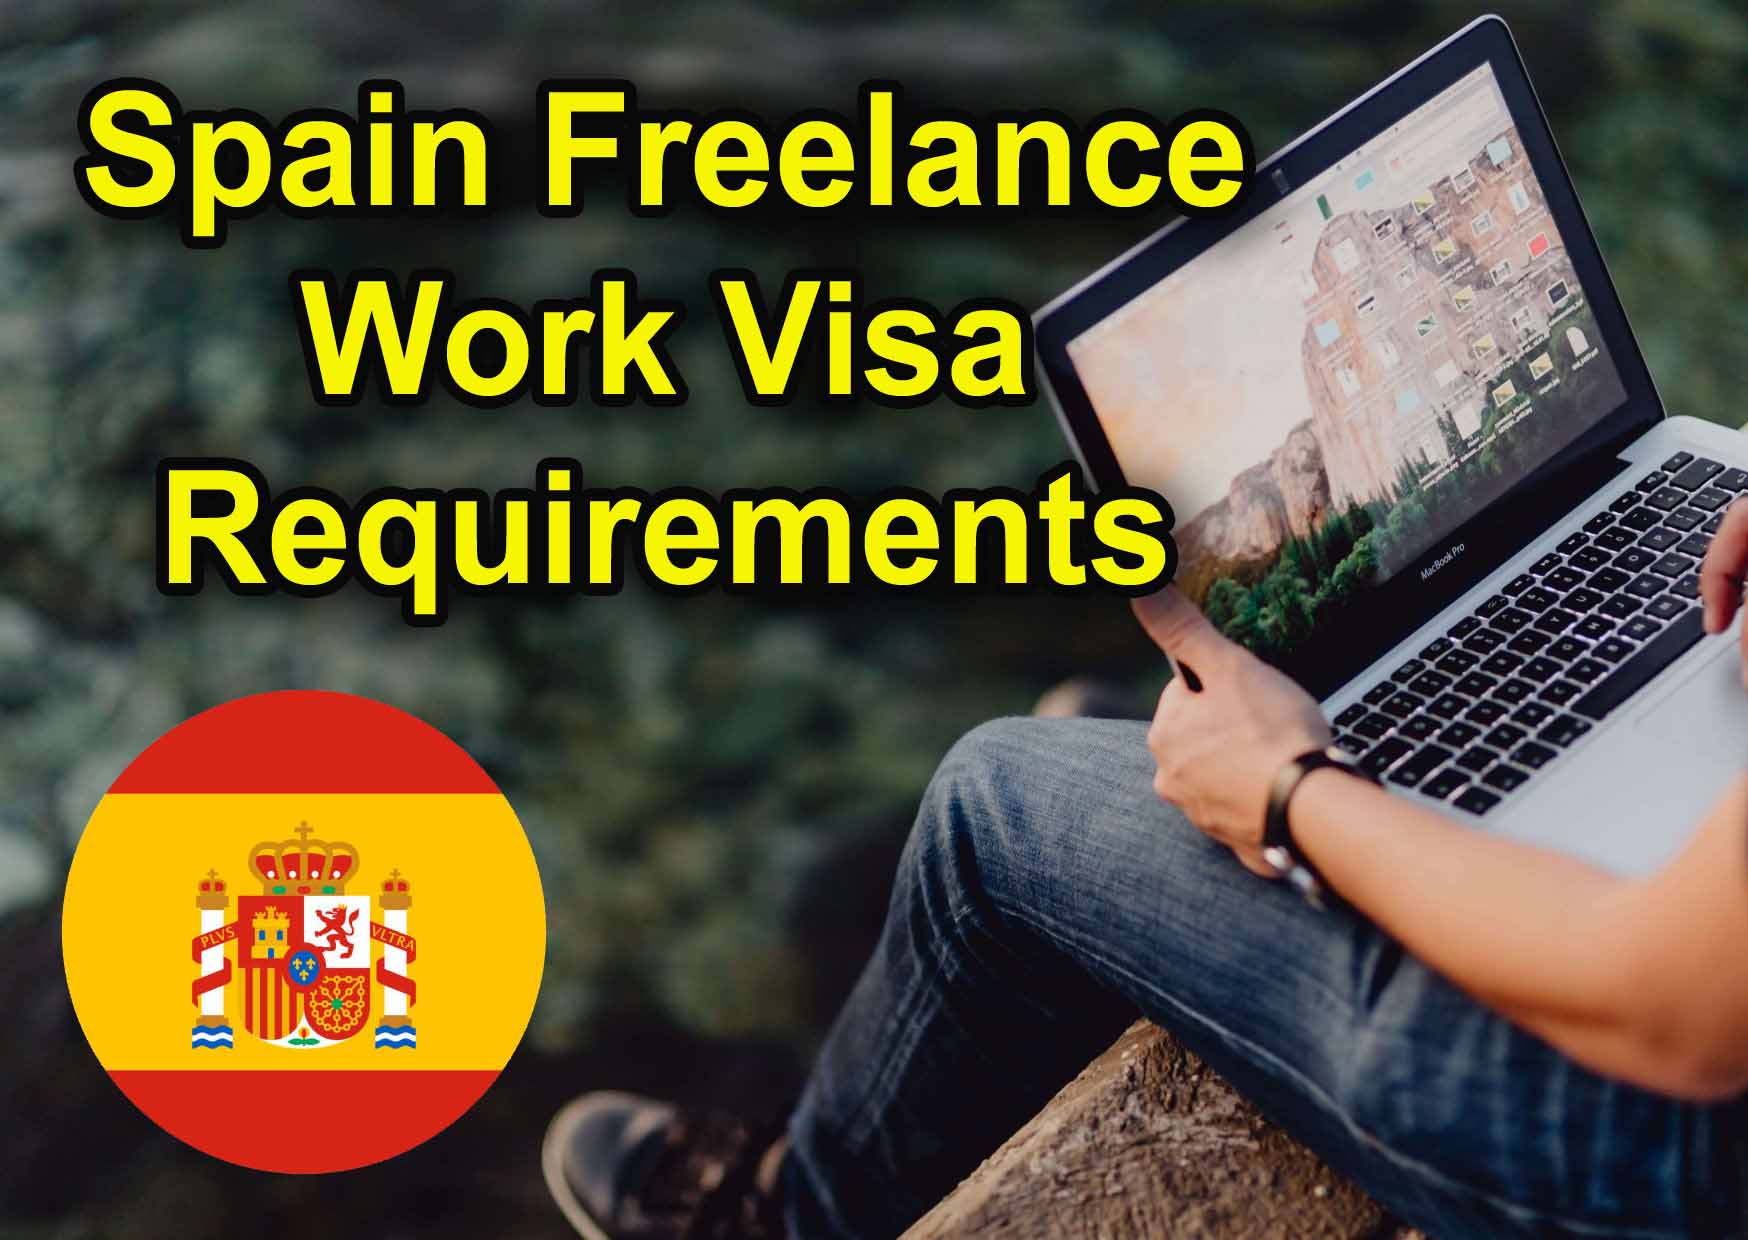 How To Get Freelance Work Visa For Spain